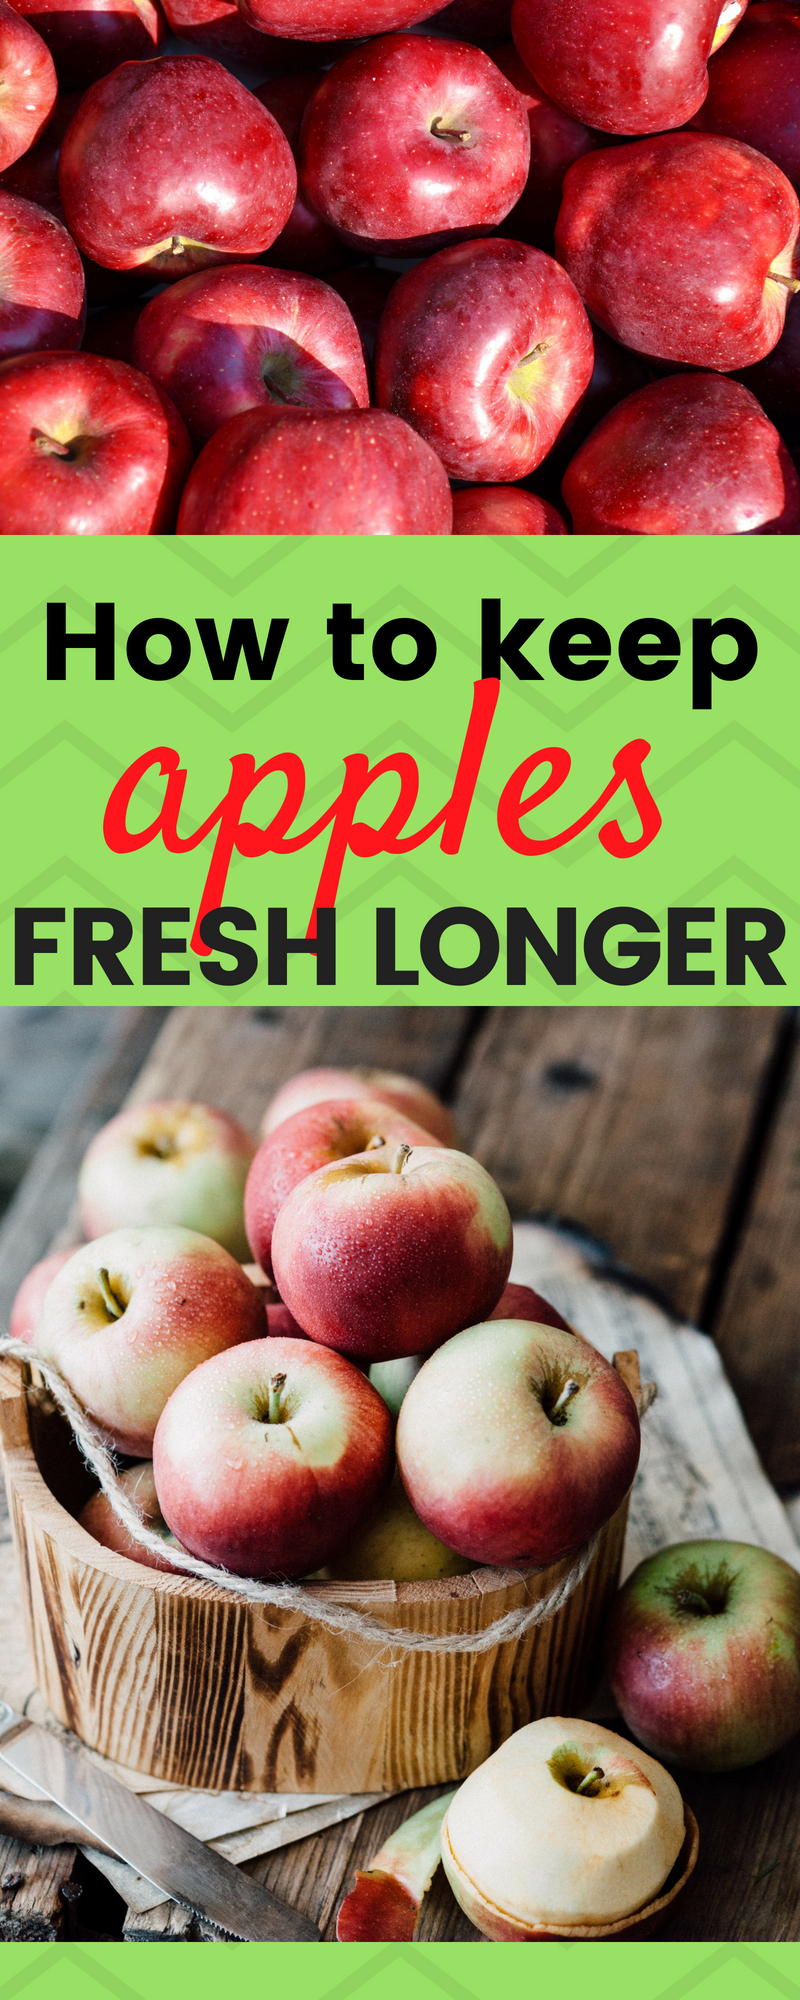 How to keep How to Store Apples to Stay Fresh Longer We love apples but they seem to go bad quickly...especially in summer time.  So, after some research and experimentation, I have learned how to store apples to stay fresh longer. #freshness #apples #homehacks